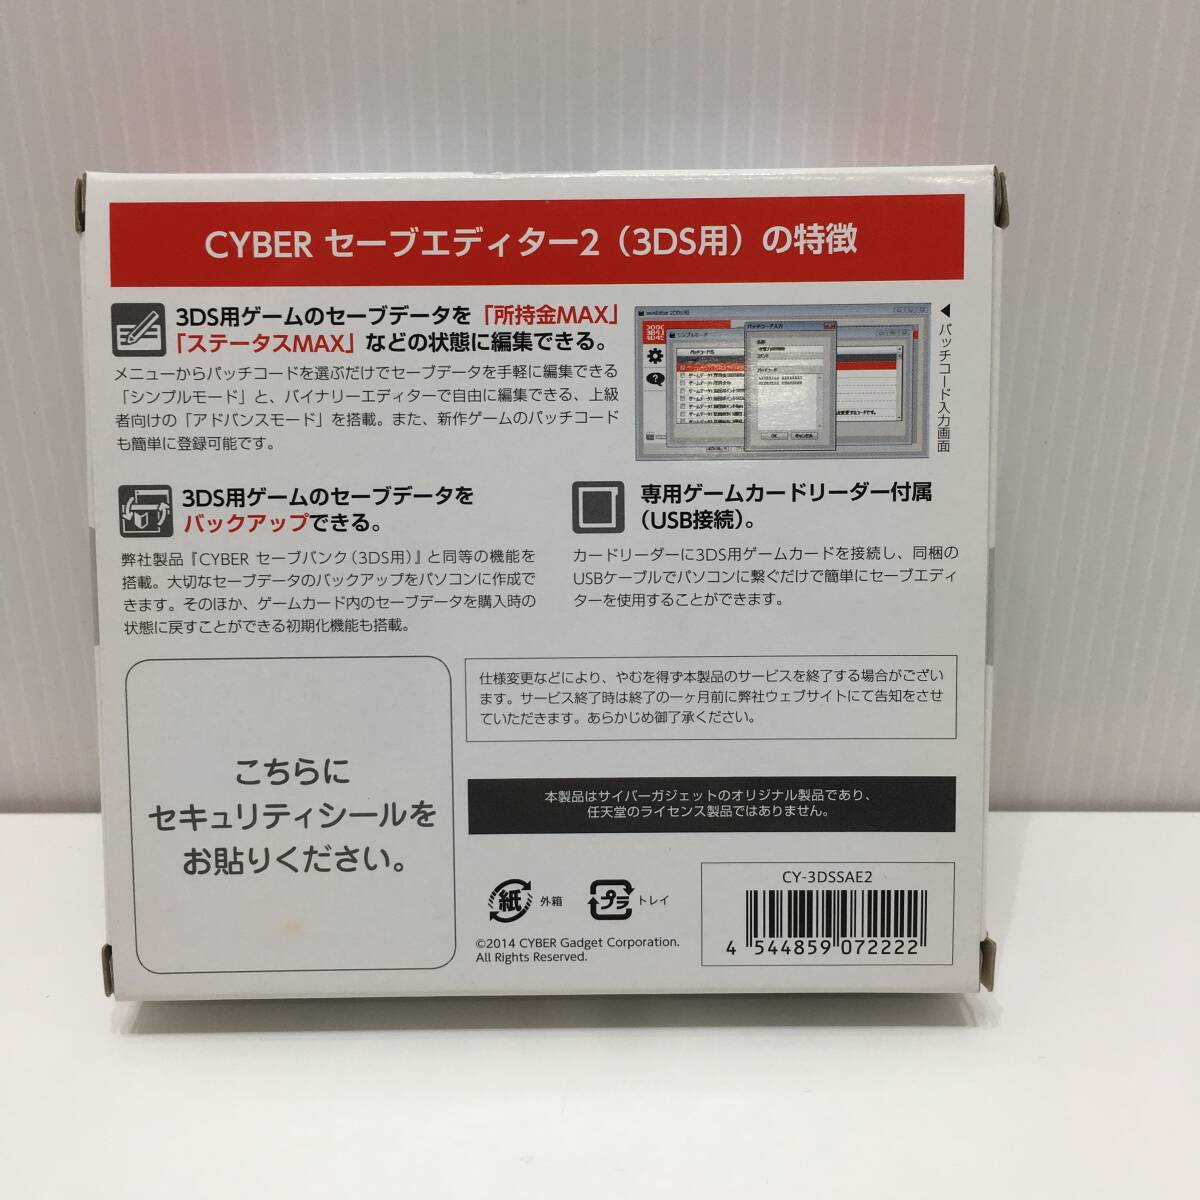 : used save Editor -2 SAVE Editor 3DS for CYBER Cyber ga jet operation verification settled 